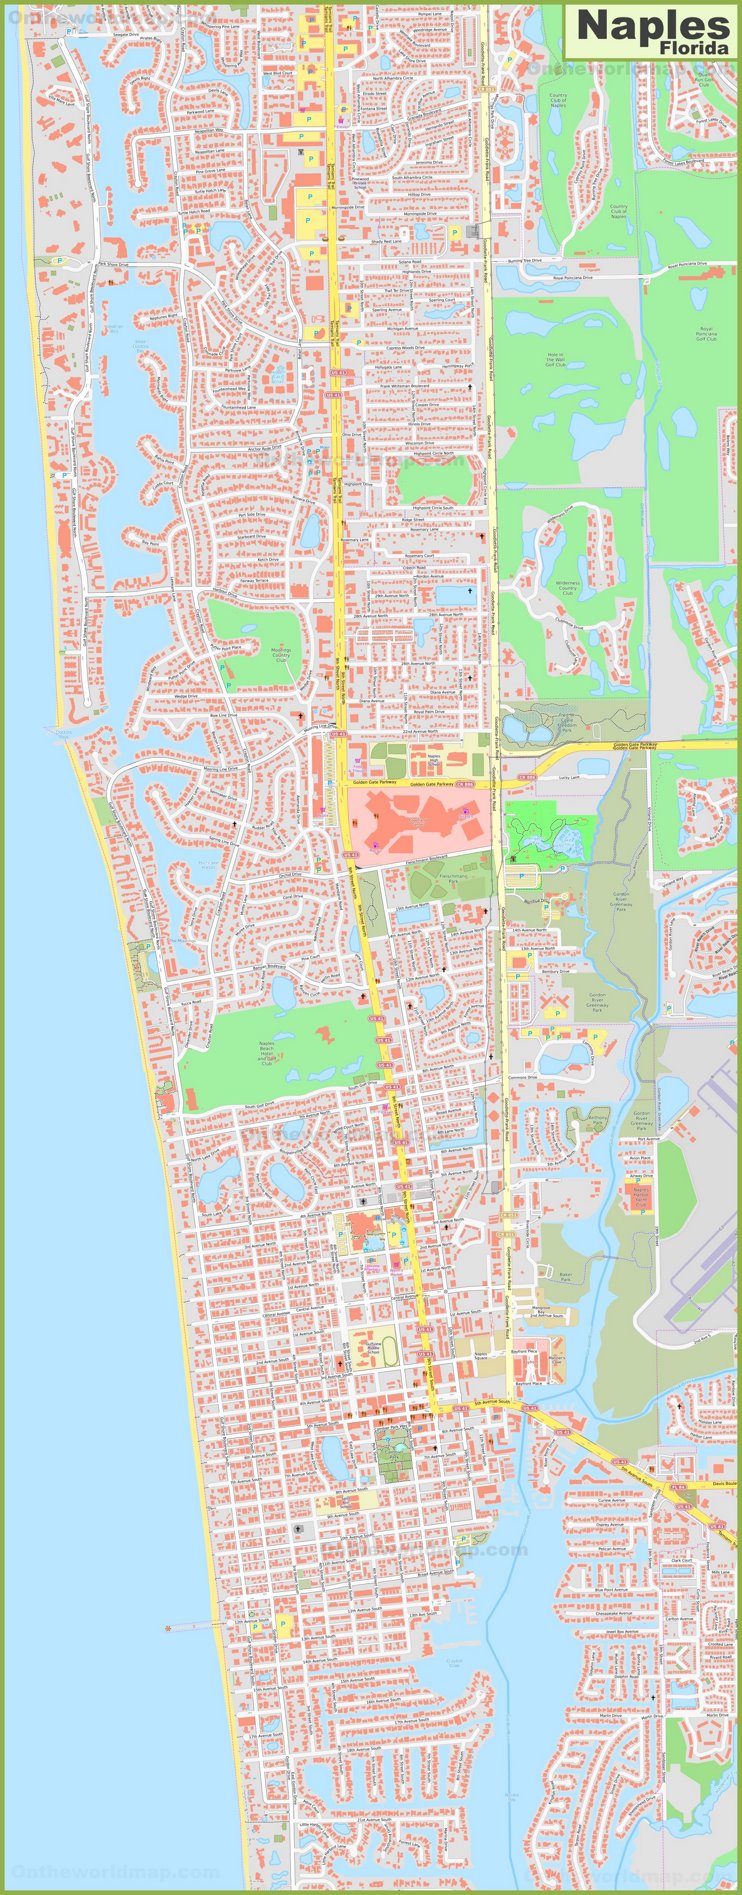 large-detailed-map-of-naples-florida